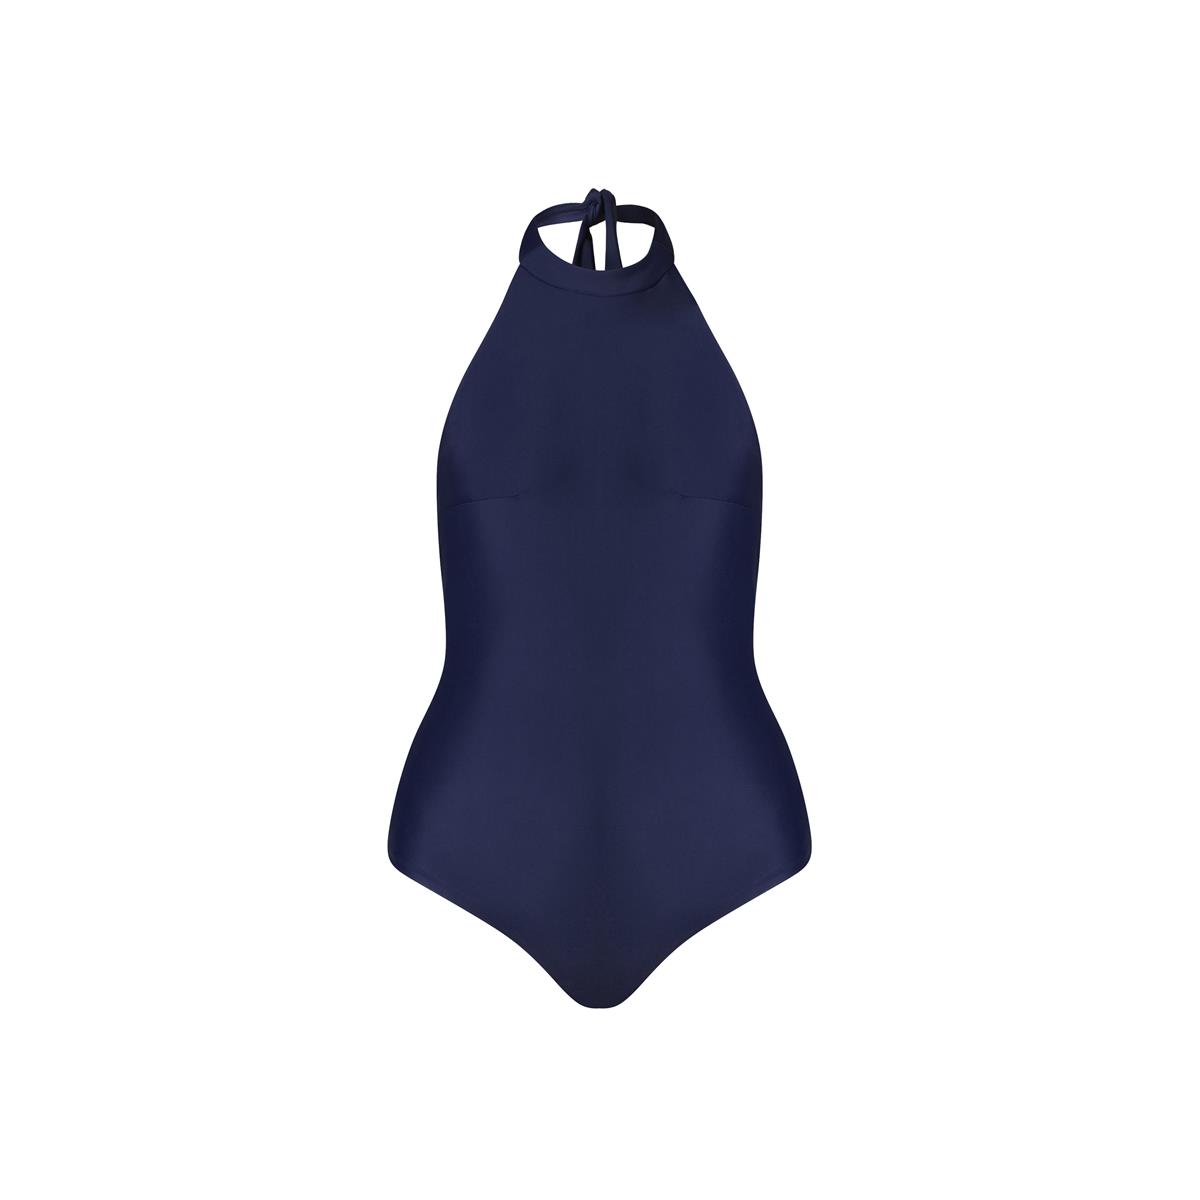 MARGARET AND HERMIONE_SS18_Swimsuit No.4_night_EUR 157,00